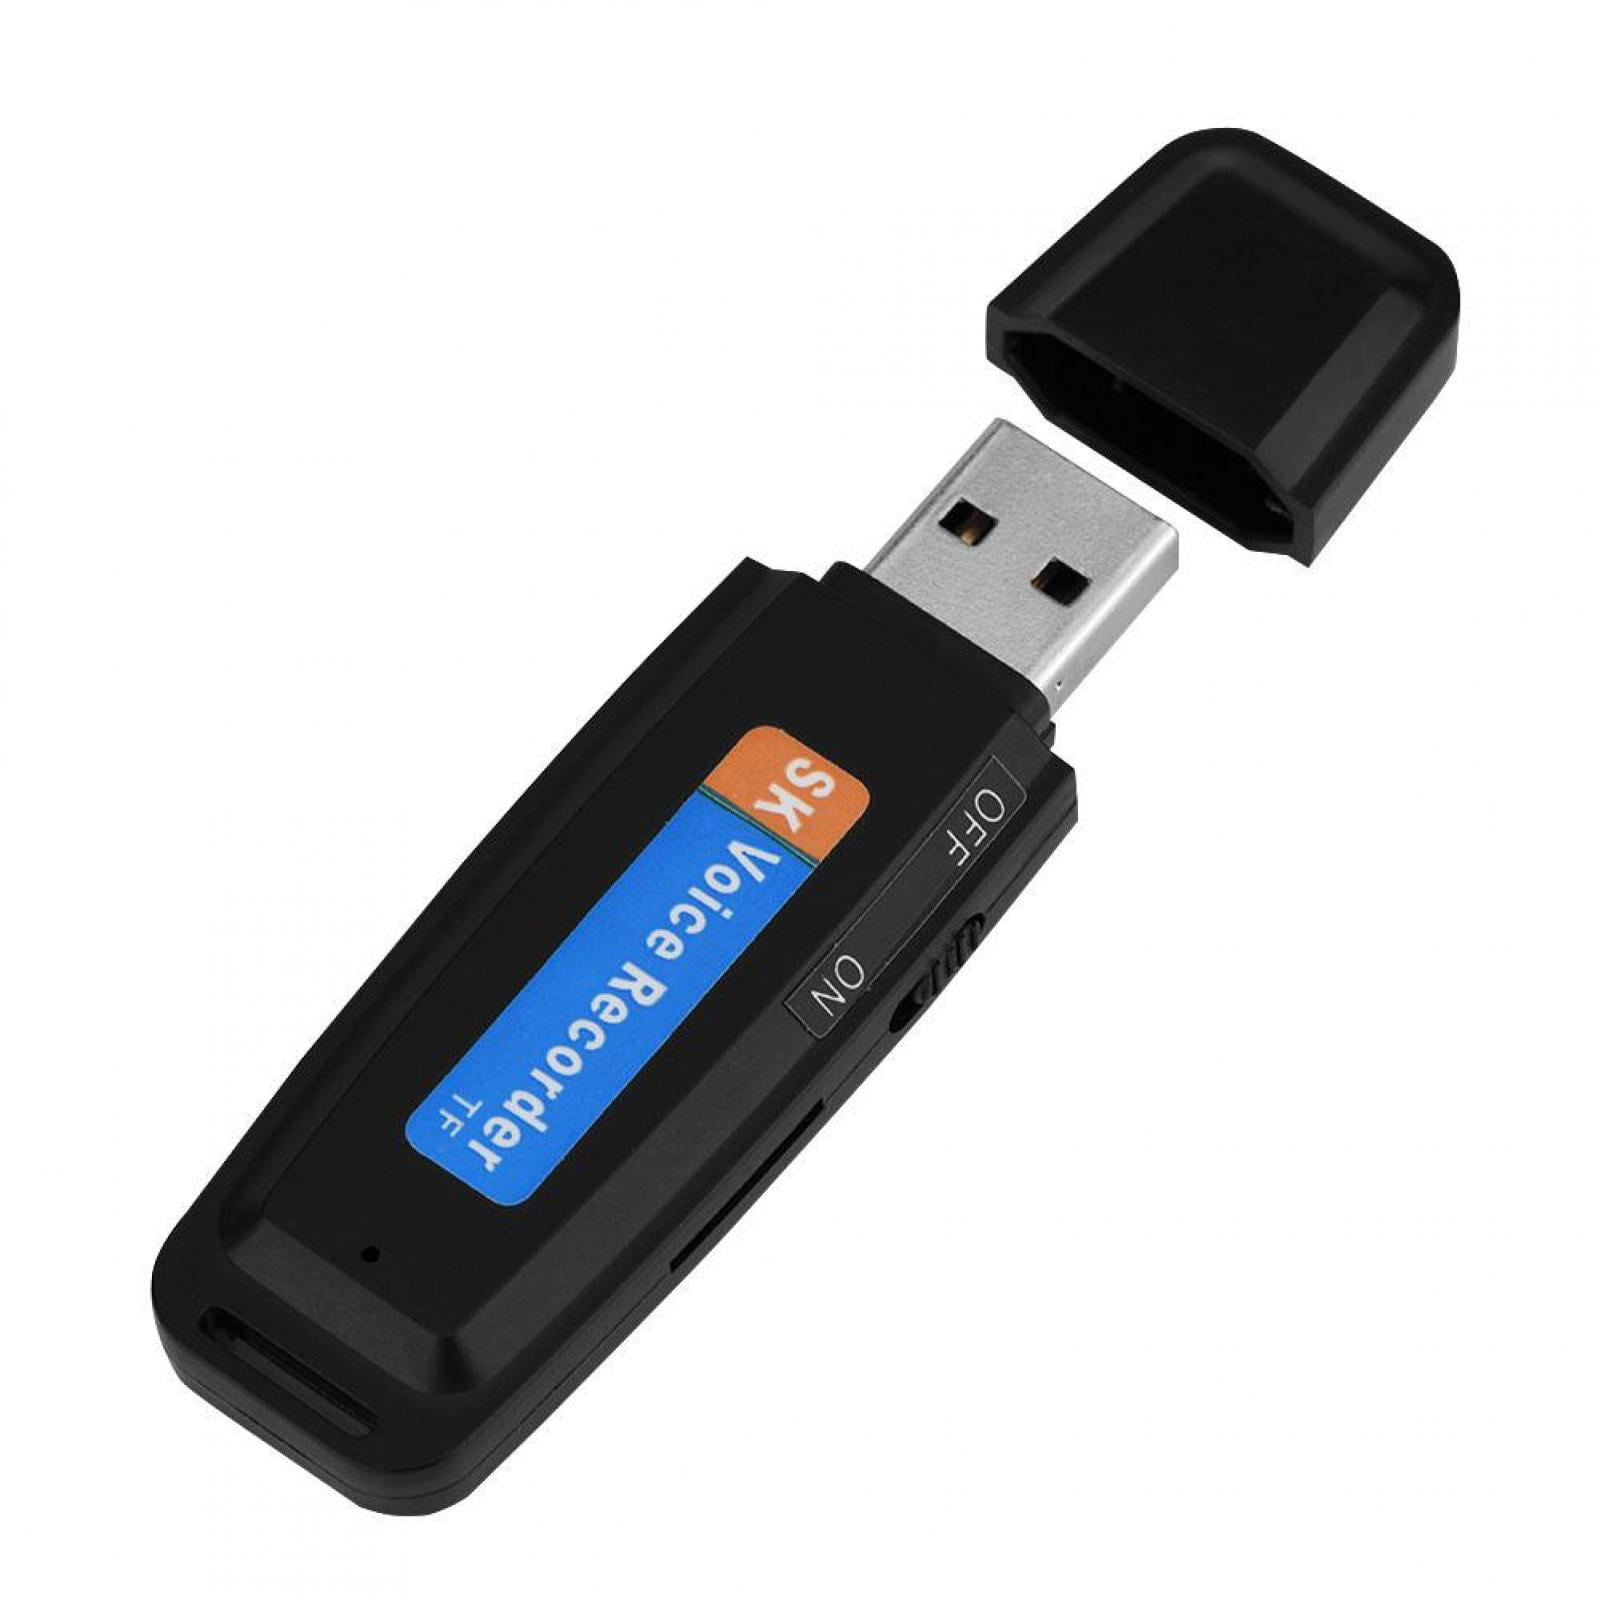 Details about   Hidden Digital Voice Activated Recorder USB Mini Audio Recording Device 8G/16G